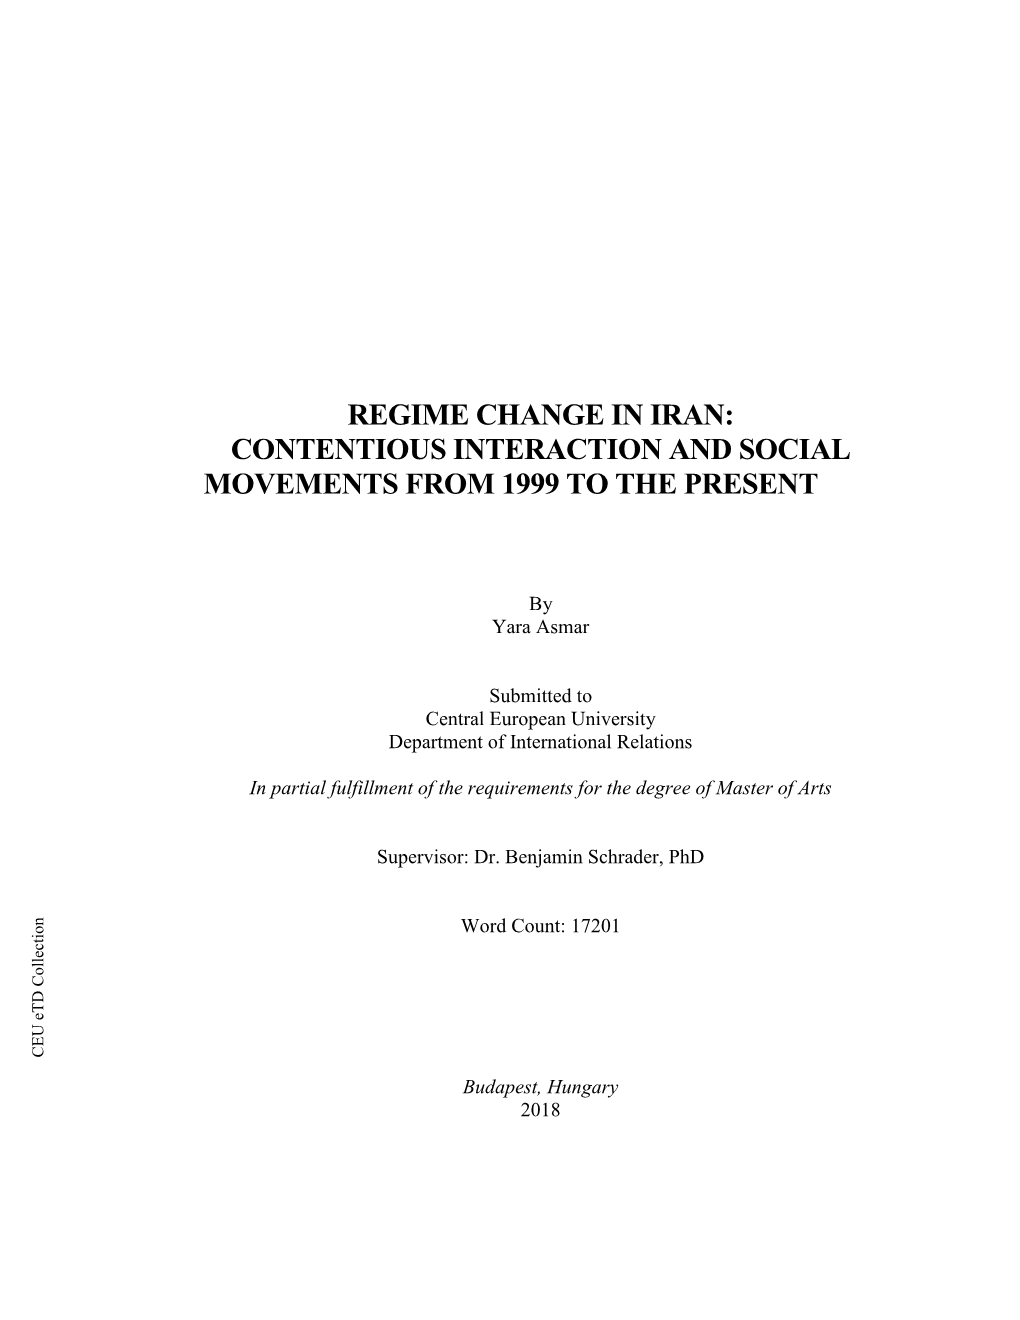 Regime Change in Iran: Contentious Interaction and Social Movements from 1999 to the Present